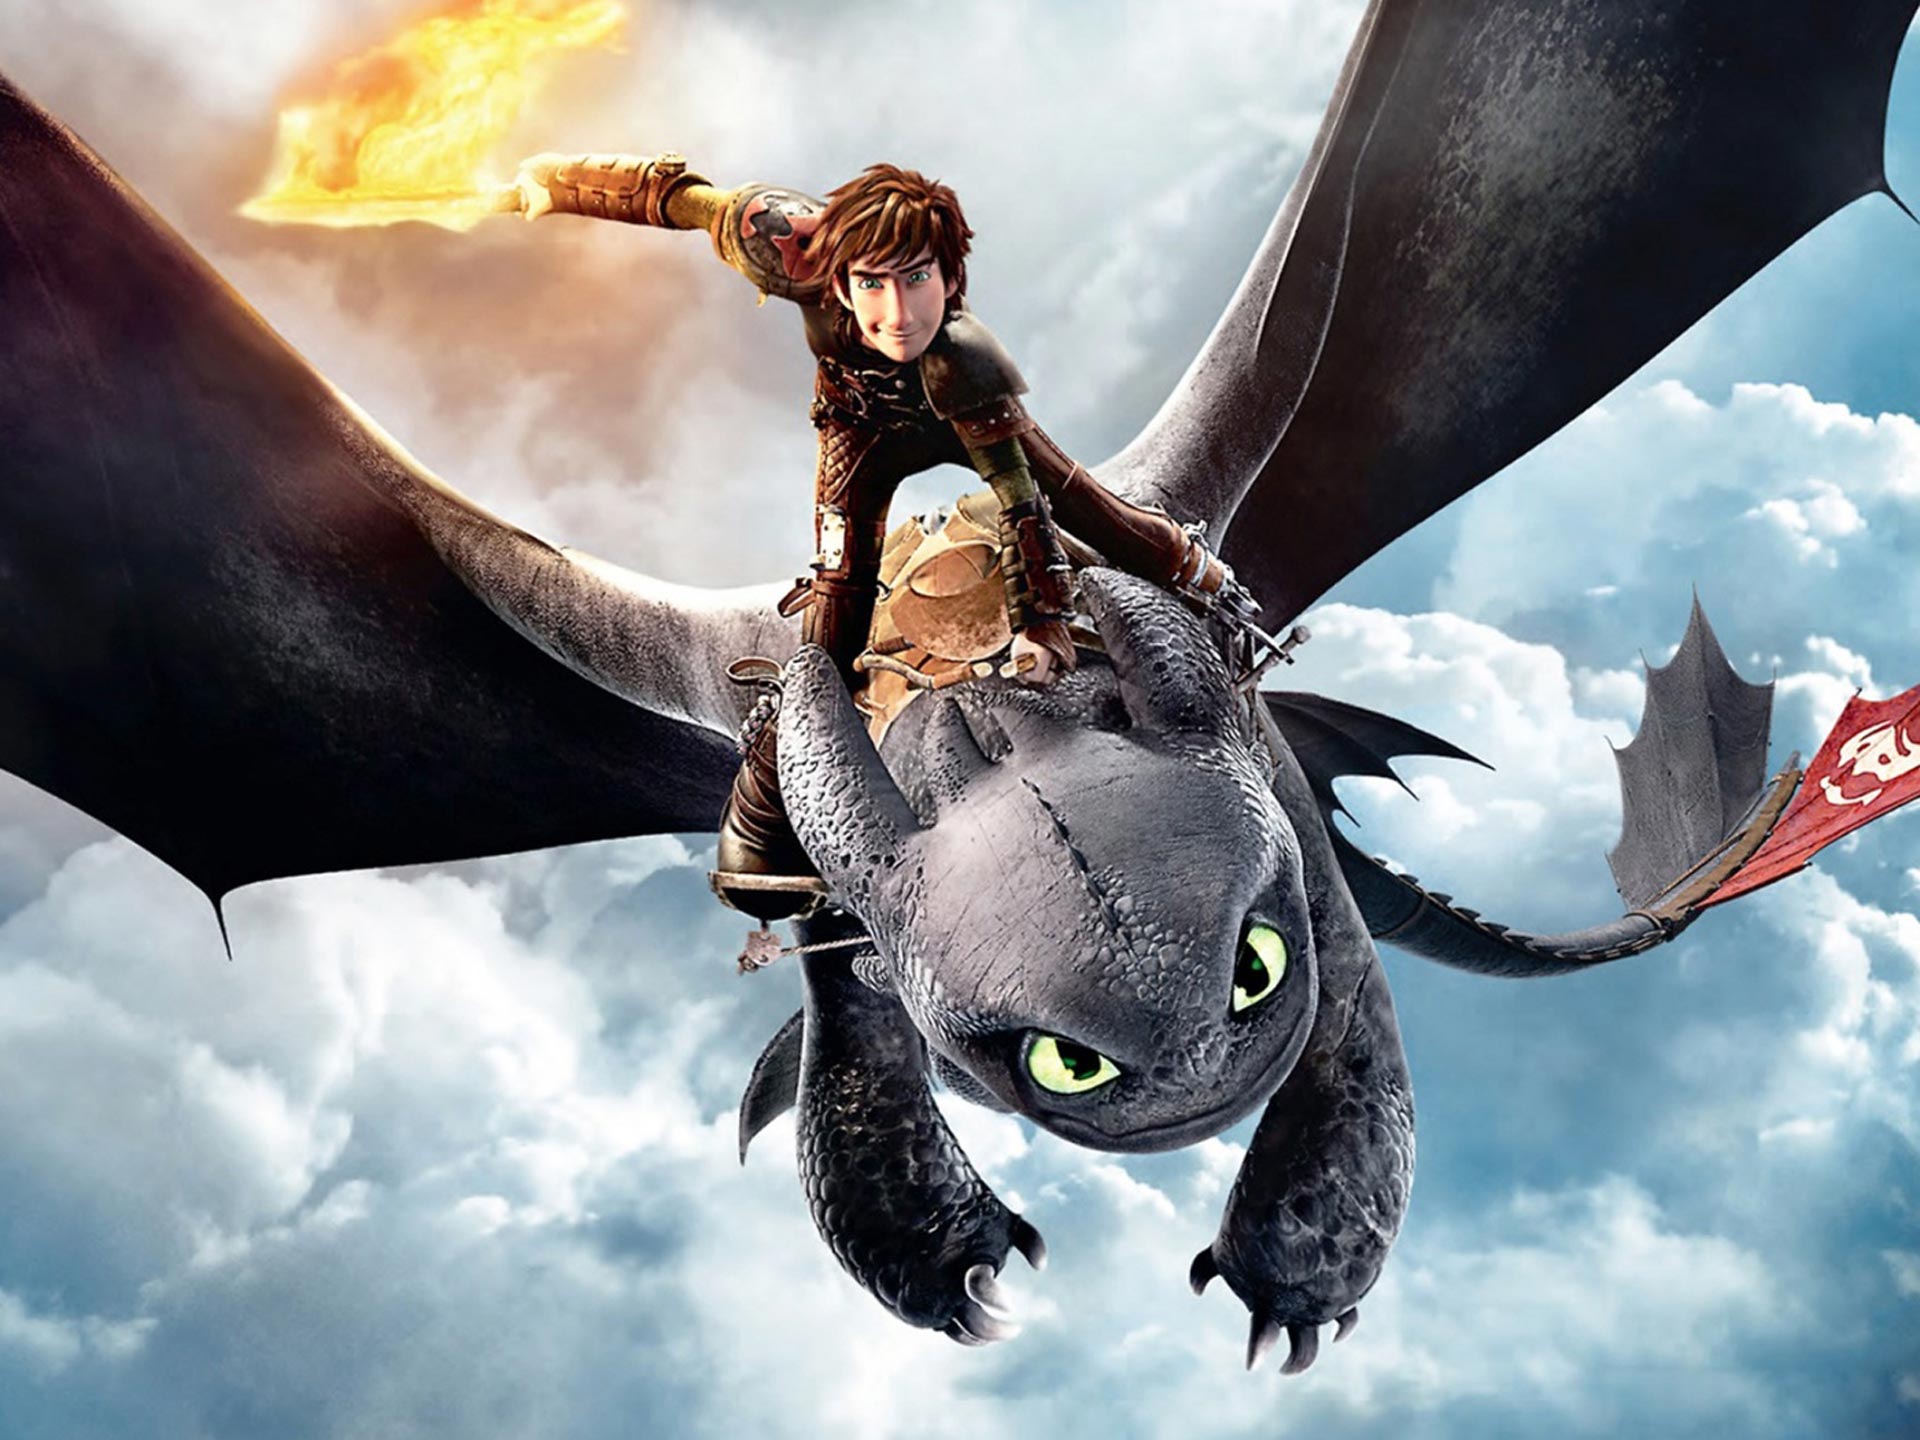 How To Train Your Dragon HD Wallpaper Unique High